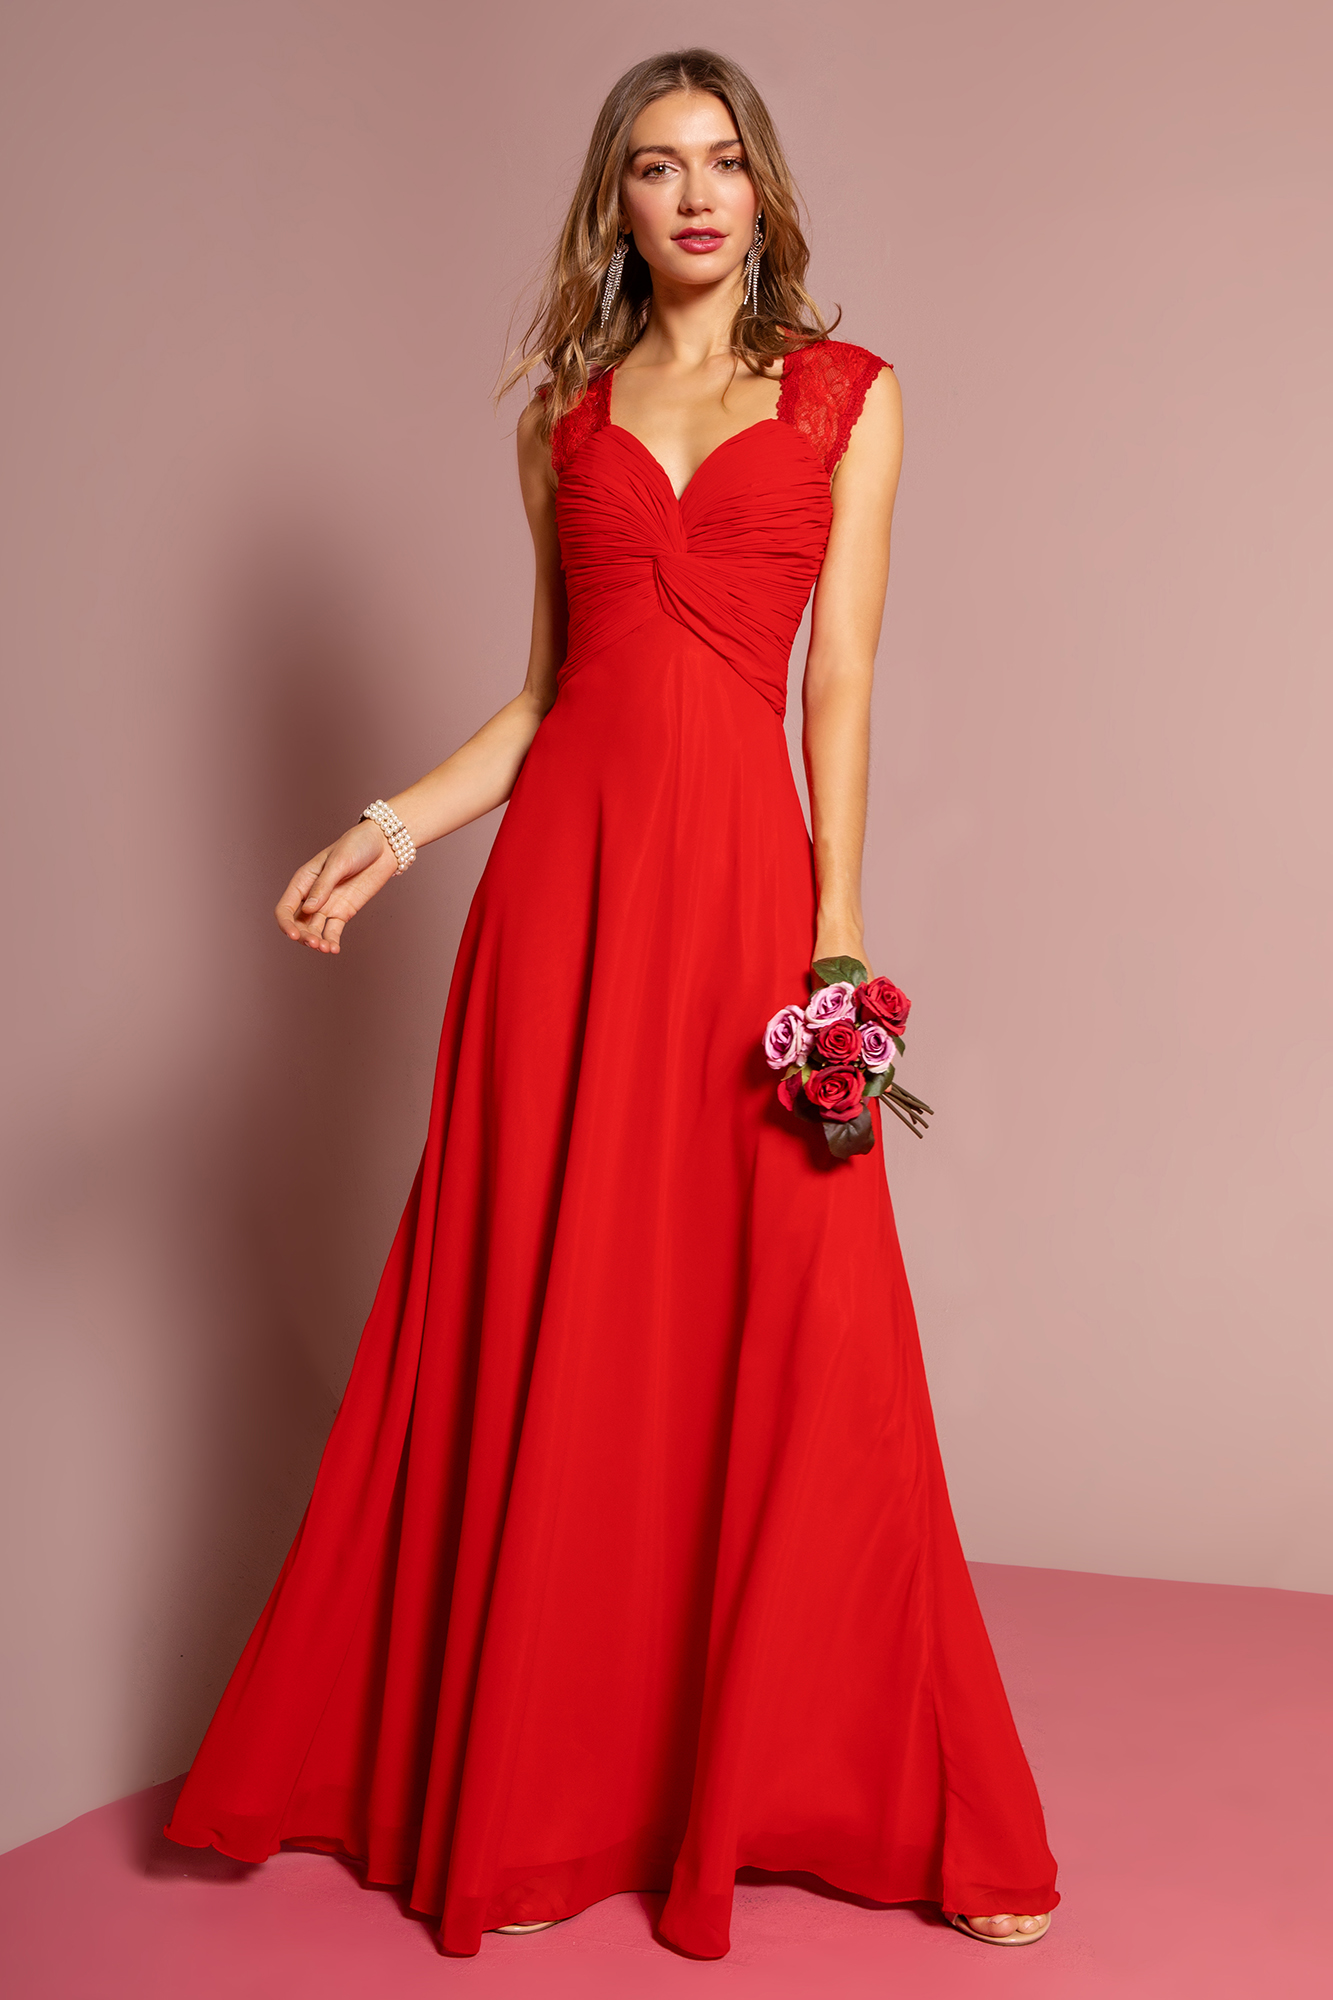 woman in red gown